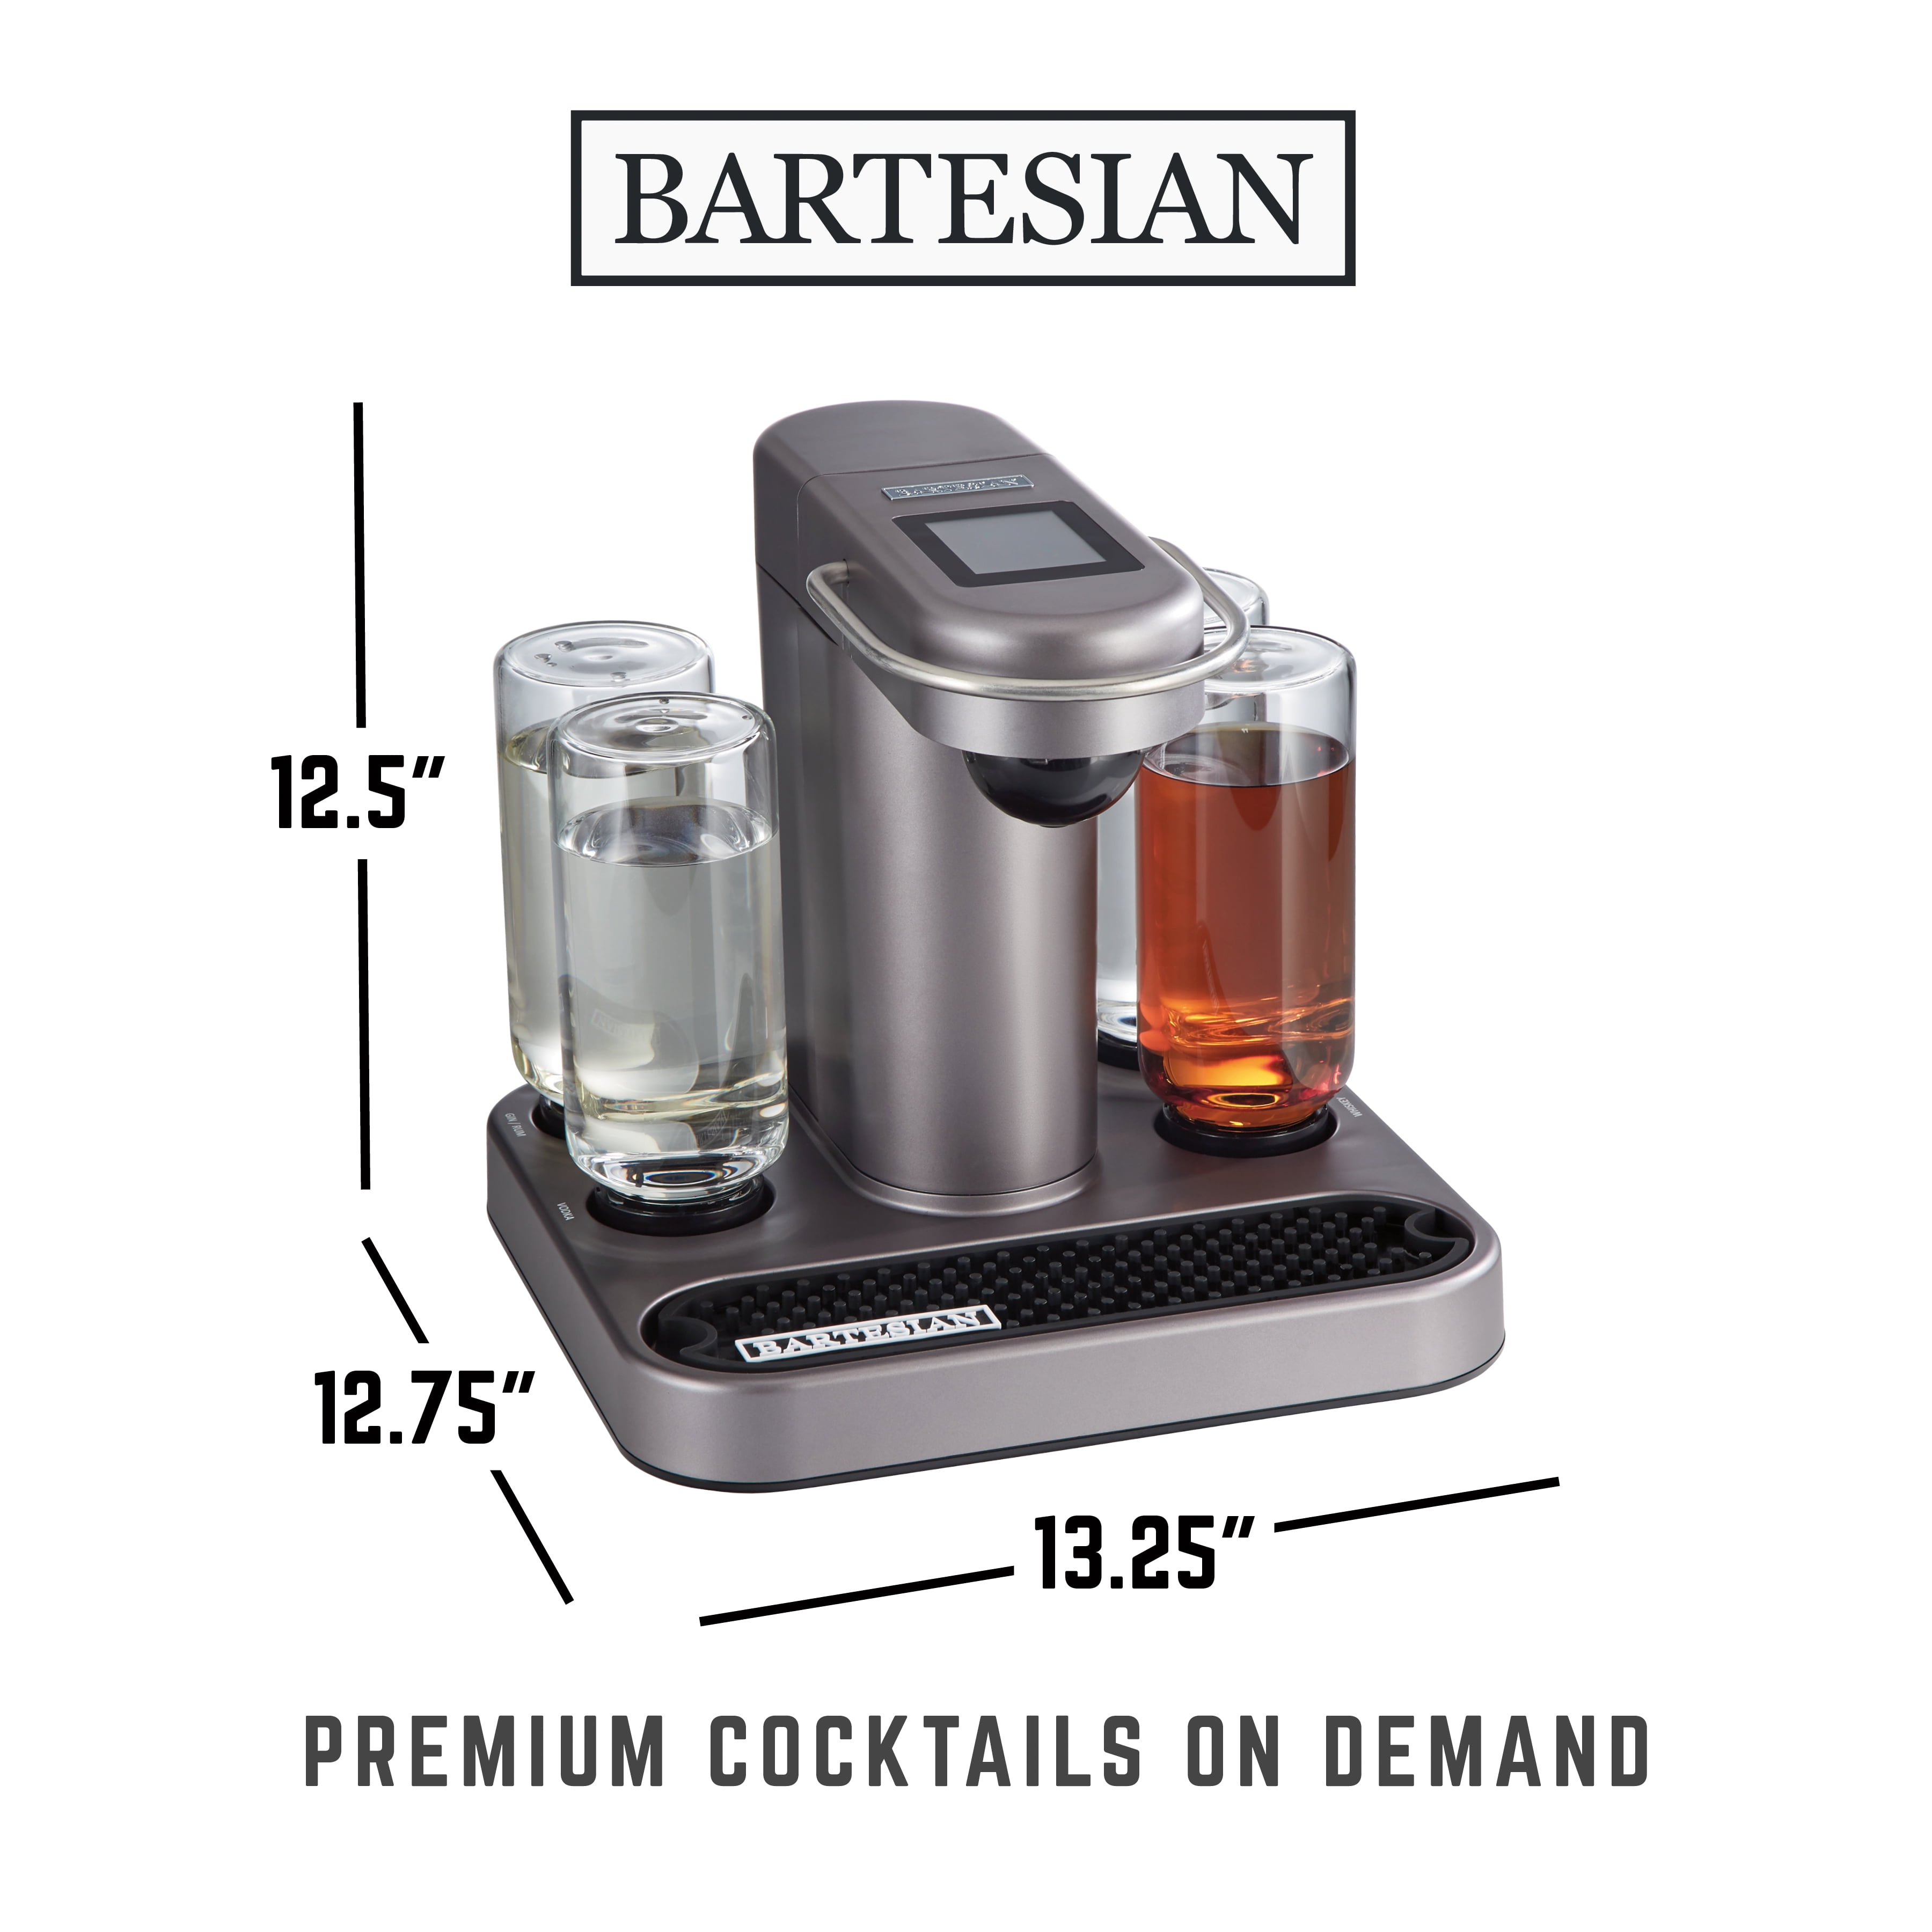 Bartesian Cocktail Machine Black And Decker for Sale in Queens, NY